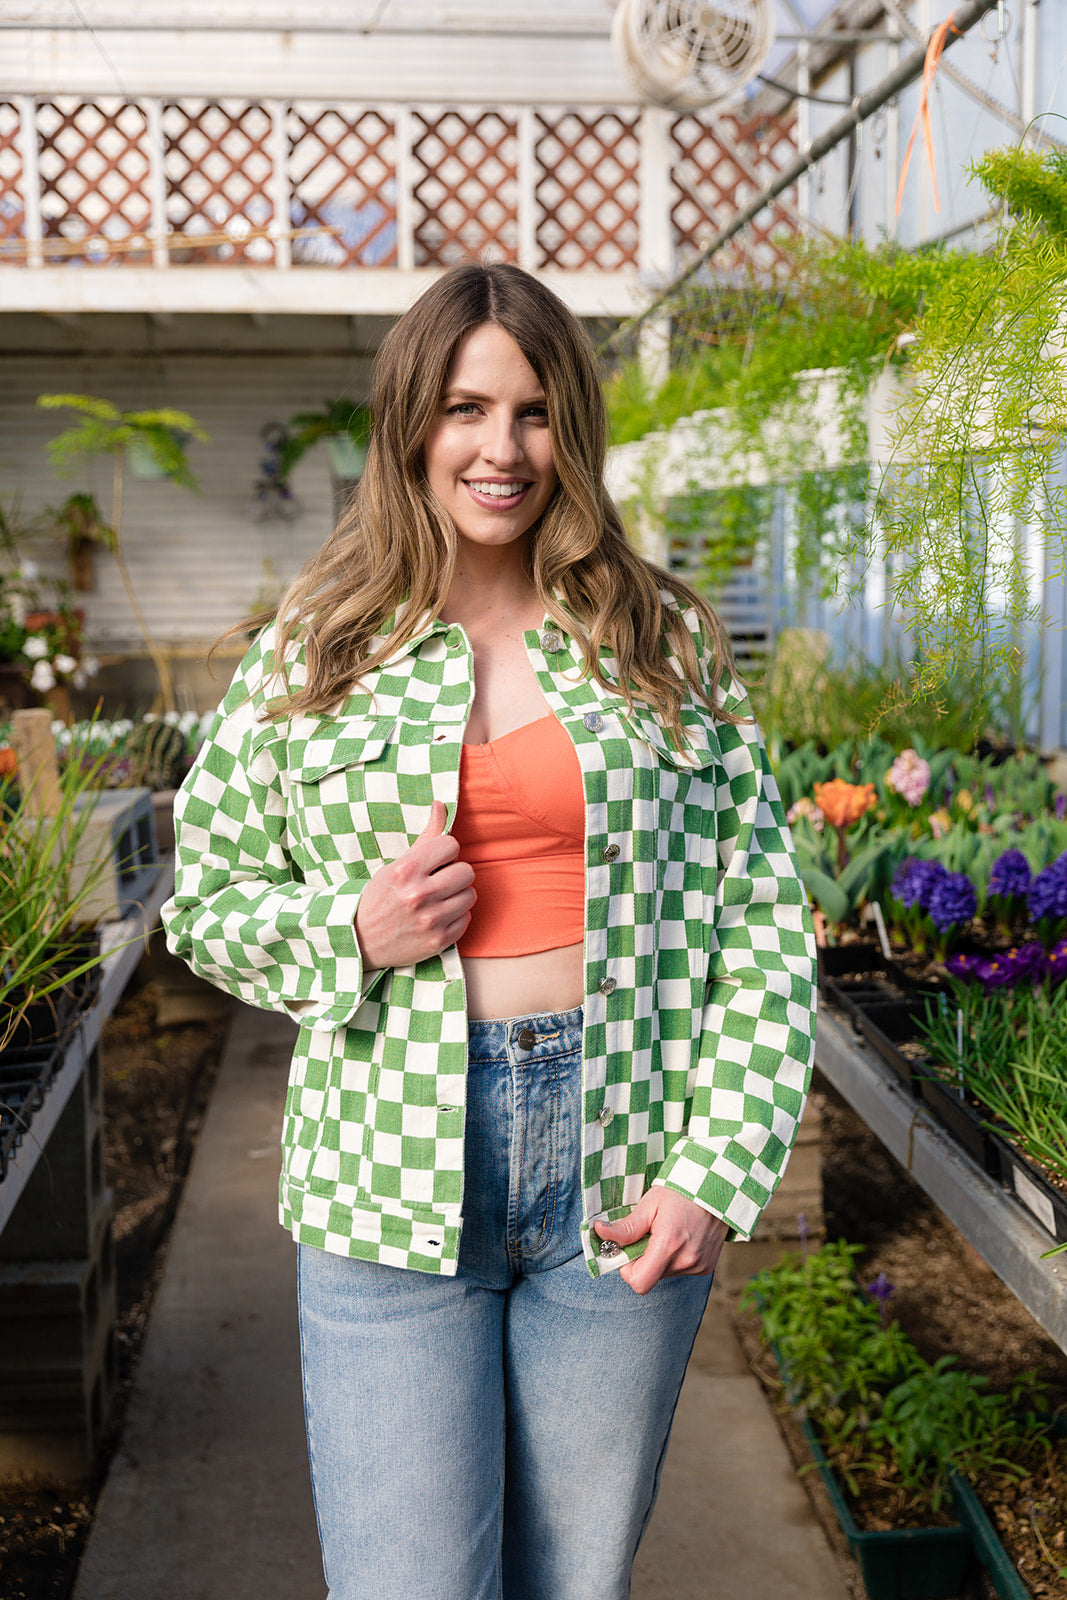 Carlys Green & White Checkered Jean Jacket